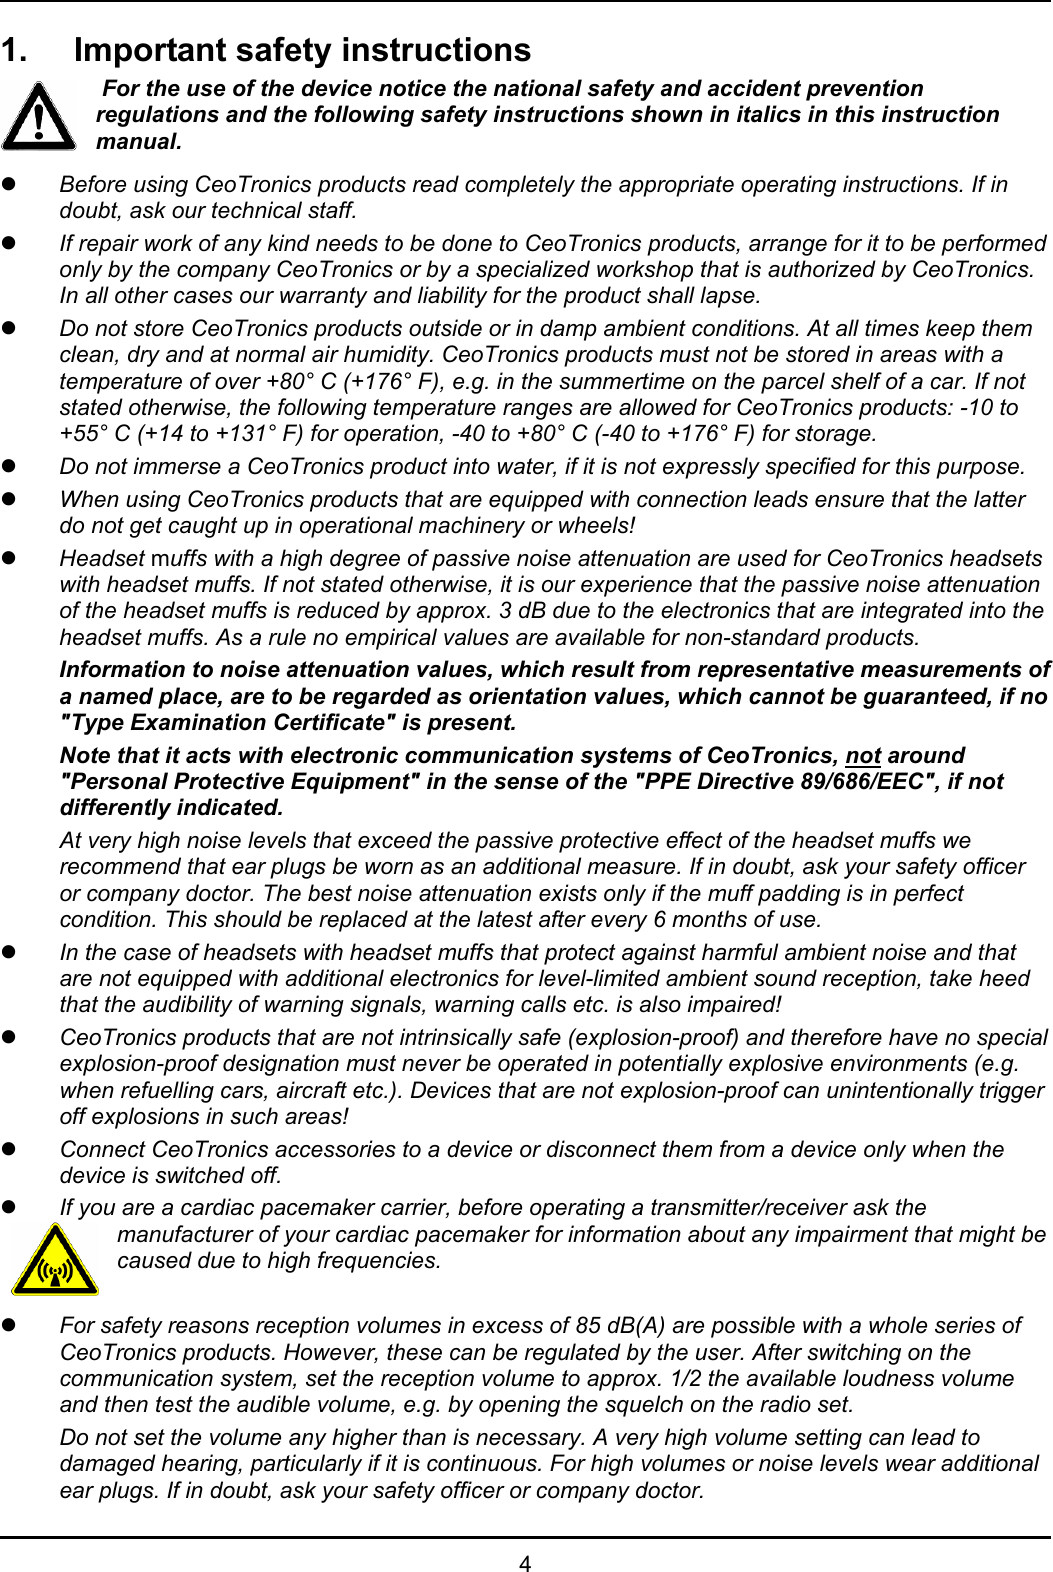   4 1.  Important safety instructions  For the use of the device notice the national safety and accident prevention regulations and the following safety instructions shown in italics in this instruction manual. z Before using CeoTronics products read completely the appropriate operating instructions. If in doubt, ask our technical staff. z If repair work of any kind needs to be done to CeoTronics products, arrange for it to be performed only by the company CeoTronics or by a specialized workshop that is authorized by CeoTronics. In all other cases our warranty and liability for the product shall lapse. z Do not store CeoTronics products outside or in damp ambient conditions. At all times keep them clean, dry and at normal air humidity. CeoTronics products must not be stored in areas with a temperature of over +80° C (+176° F), e.g. in the summertime on the parcel shelf of a car. If not stated otherwise, the following temperature ranges are allowed for CeoTronics products: -10 to +55° C (+14 to +131° F) for operation, -40 to +80° C (-40 to +176° F) for storage. z Do not immerse a CeoTronics product into water, if it is not expressly specified for this purpose. z When using CeoTronics products that are equipped with connection leads ensure that the latter do not get caught up in operational machinery or wheels! z Headset muffs with a high degree of passive noise attenuation are used for CeoTronics headsets with headset muffs. If not stated otherwise, it is our experience that the passive noise attenuation of the headset muffs is reduced by approx. 3 dB due to the electronics that are integrated into the headset muffs. As a rule no empirical values are available for non-standard products. Information to noise attenuation values, which result from representative measurements of a named place, are to be regarded as orientation values, which cannot be guaranteed, if no &quot;Type Examination Certificate&quot; is present.  Note that it acts with electronic communication systems of CeoTronics, not around &quot;Personal Protective Equipment&quot; in the sense of the &quot;PPE Directive 89/686/EEC&quot;, if not differently indicated. At very high noise levels that exceed the passive protective effect of the headset muffs we recommend that ear plugs be worn as an additional measure. If in doubt, ask your safety officer or company doctor. The best noise attenuation exists only if the muff padding is in perfect condition. This should be replaced at the latest after every 6 months of use. z In the case of headsets with headset muffs that protect against harmful ambient noise and that are not equipped with additional electronics for level-limited ambient sound reception, take heed that the audibility of warning signals, warning calls etc. is also impaired! z CeoTronics products that are not intrinsically safe (explosion-proof) and therefore have no special explosion-proof designation must never be operated in potentially explosive environments (e.g. when refuelling cars, aircraft etc.). Devices that are not explosion-proof can unintentionally trigger off explosions in such areas! z Connect CeoTronics accessories to a device or disconnect them from a device only when the device is switched off.  z If you are a cardiac pacemaker carrier, before operating a transmitter/receiver ask the manufacturer of your cardiac pacemaker for information about any impairment that might be caused due to high frequencies.  z For safety reasons reception volumes in excess of 85 dB(A) are possible with a whole series of CeoTronics products. However, these can be regulated by the user. After switching on the communication system, set the reception volume to approx. 1/2 the available loudness volume and then test the audible volume, e.g. by opening the squelch on the radio set.  Do not set the volume any higher than is necessary. A very high volume setting can lead to damaged hearing, particularly if it is continuous. For high volumes or noise levels wear additional ear plugs. If in doubt, ask your safety officer or company doctor. 